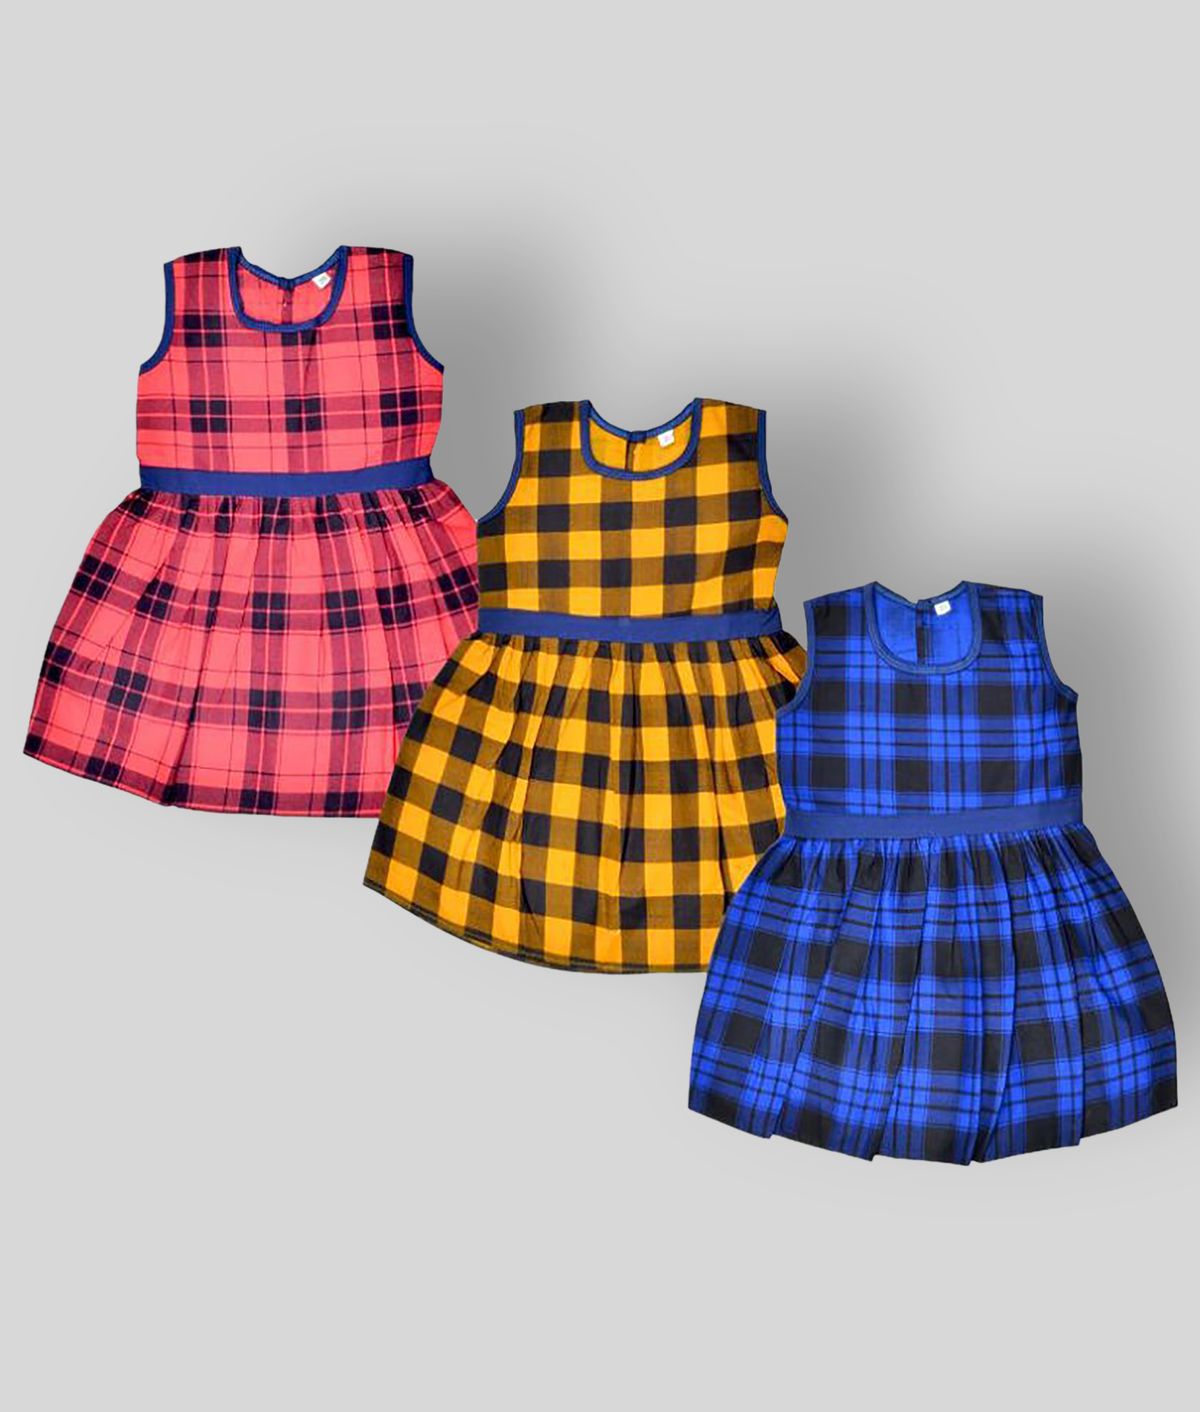     			Sathiyas Red, Yellow and Blue 100% Cotton Girls Checked Pattern Dress Pack of 3